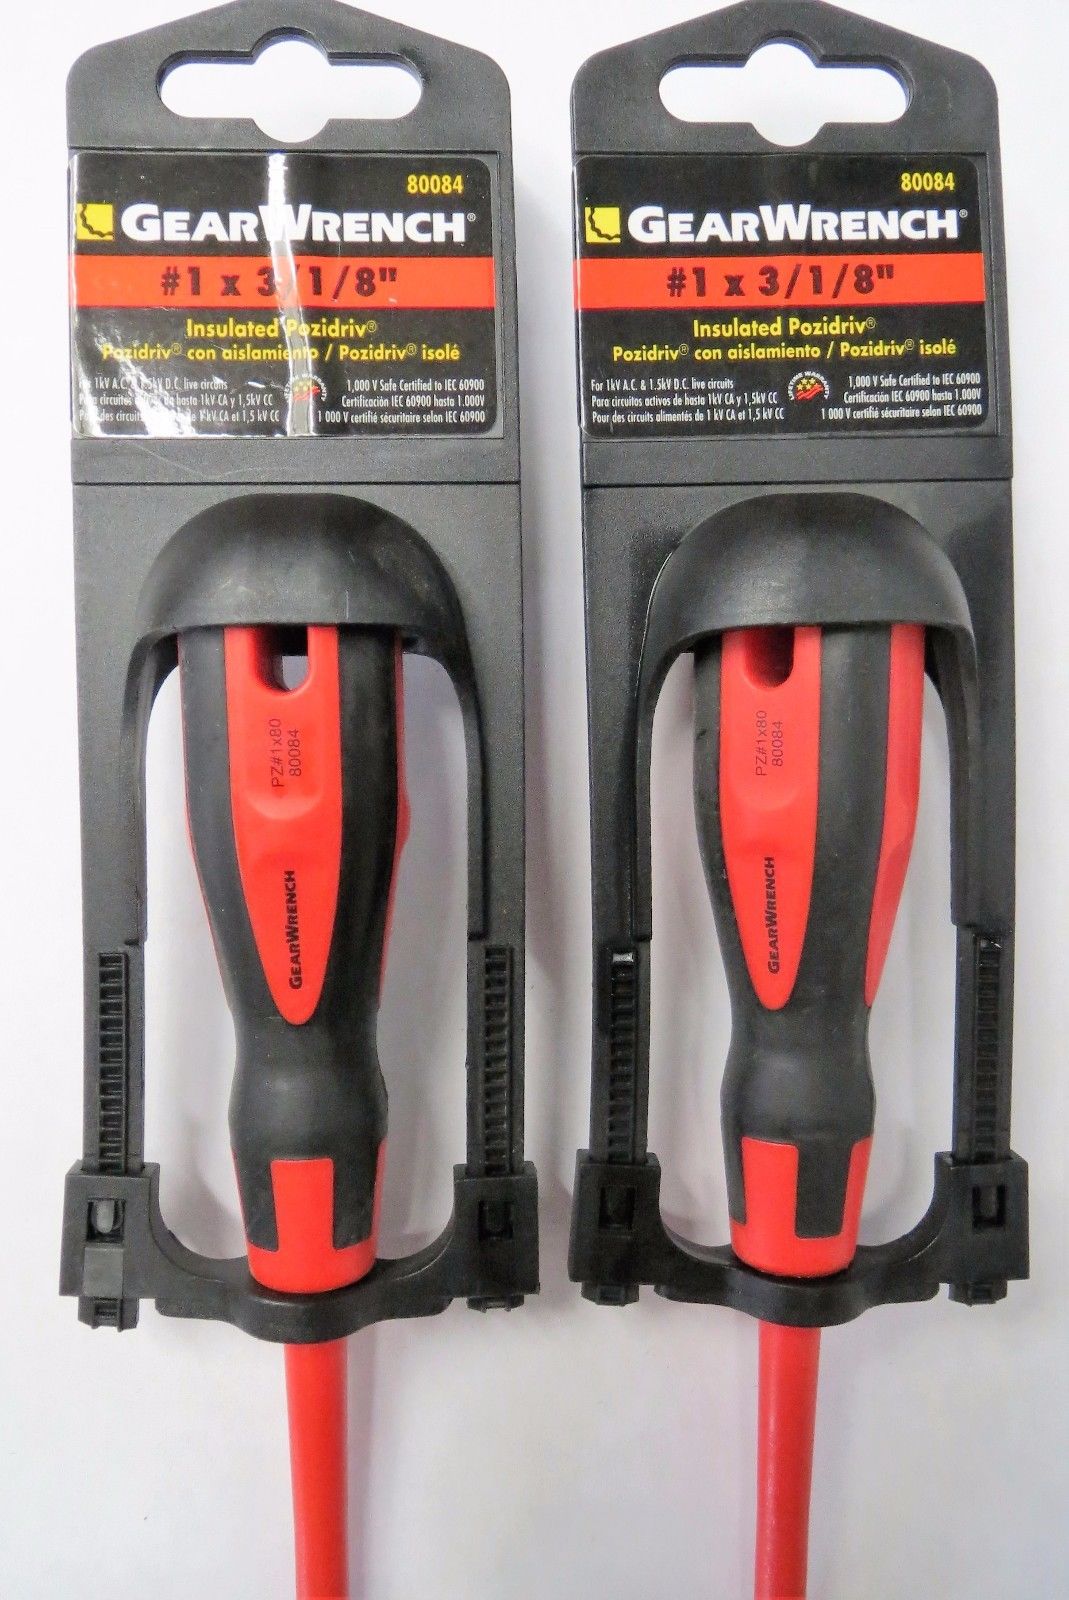 GearWrench 80084 #1 x 3-1/8" Pozi Insulated Screwdriver (2pcs)